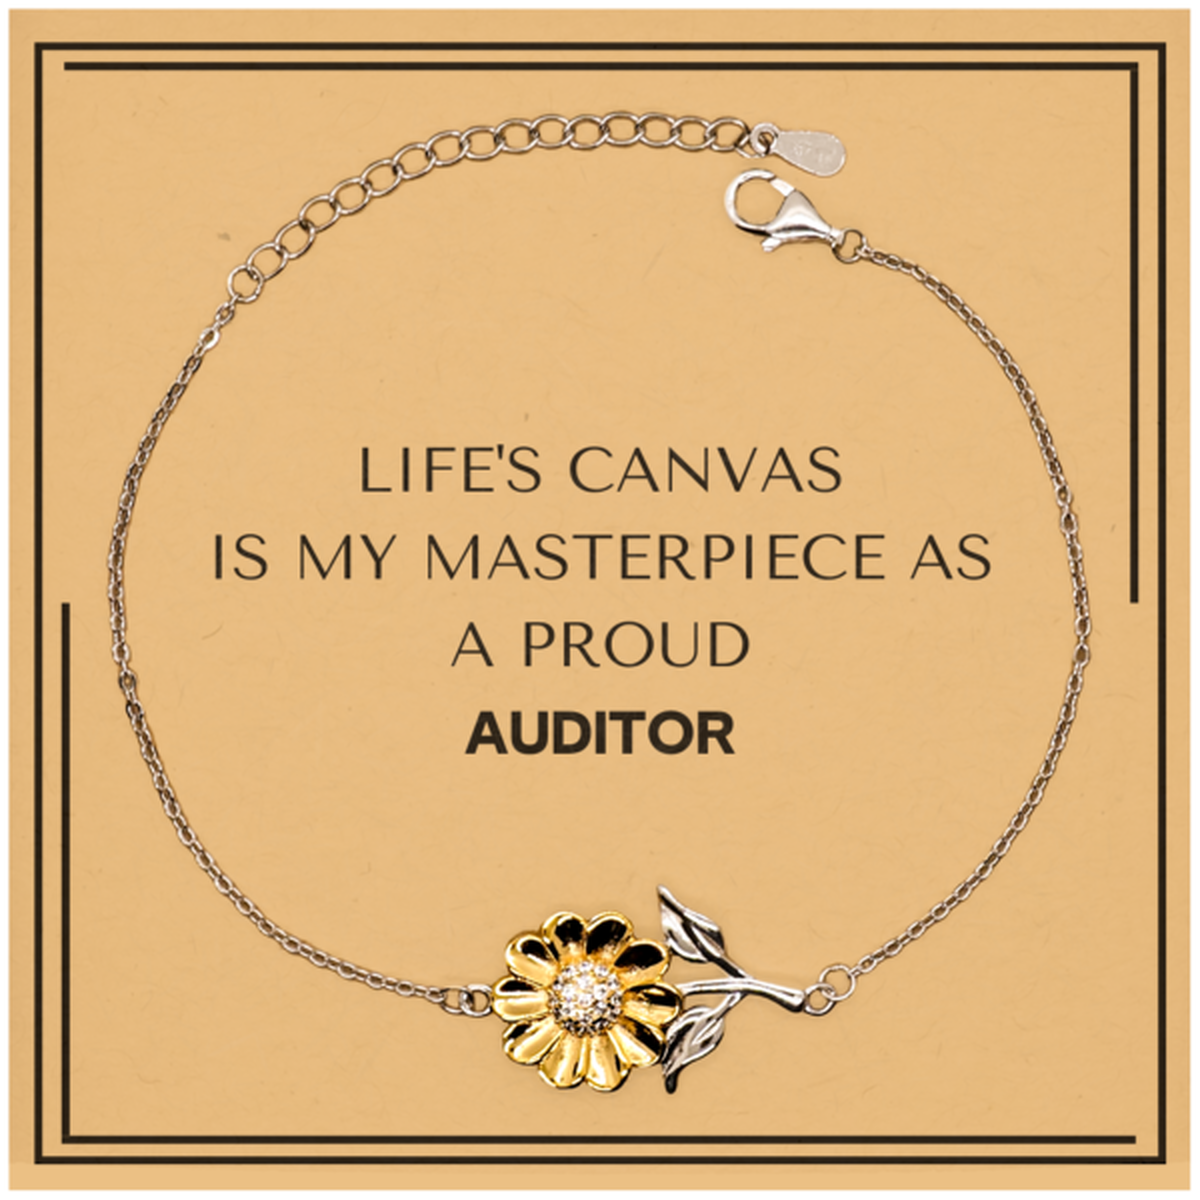 Proud Auditor Gifts, Life's canvas is my masterpiece, Epic Birthday Christmas Unique Sunflower Bracelet For Auditor, Coworkers, Men, Women, Friends